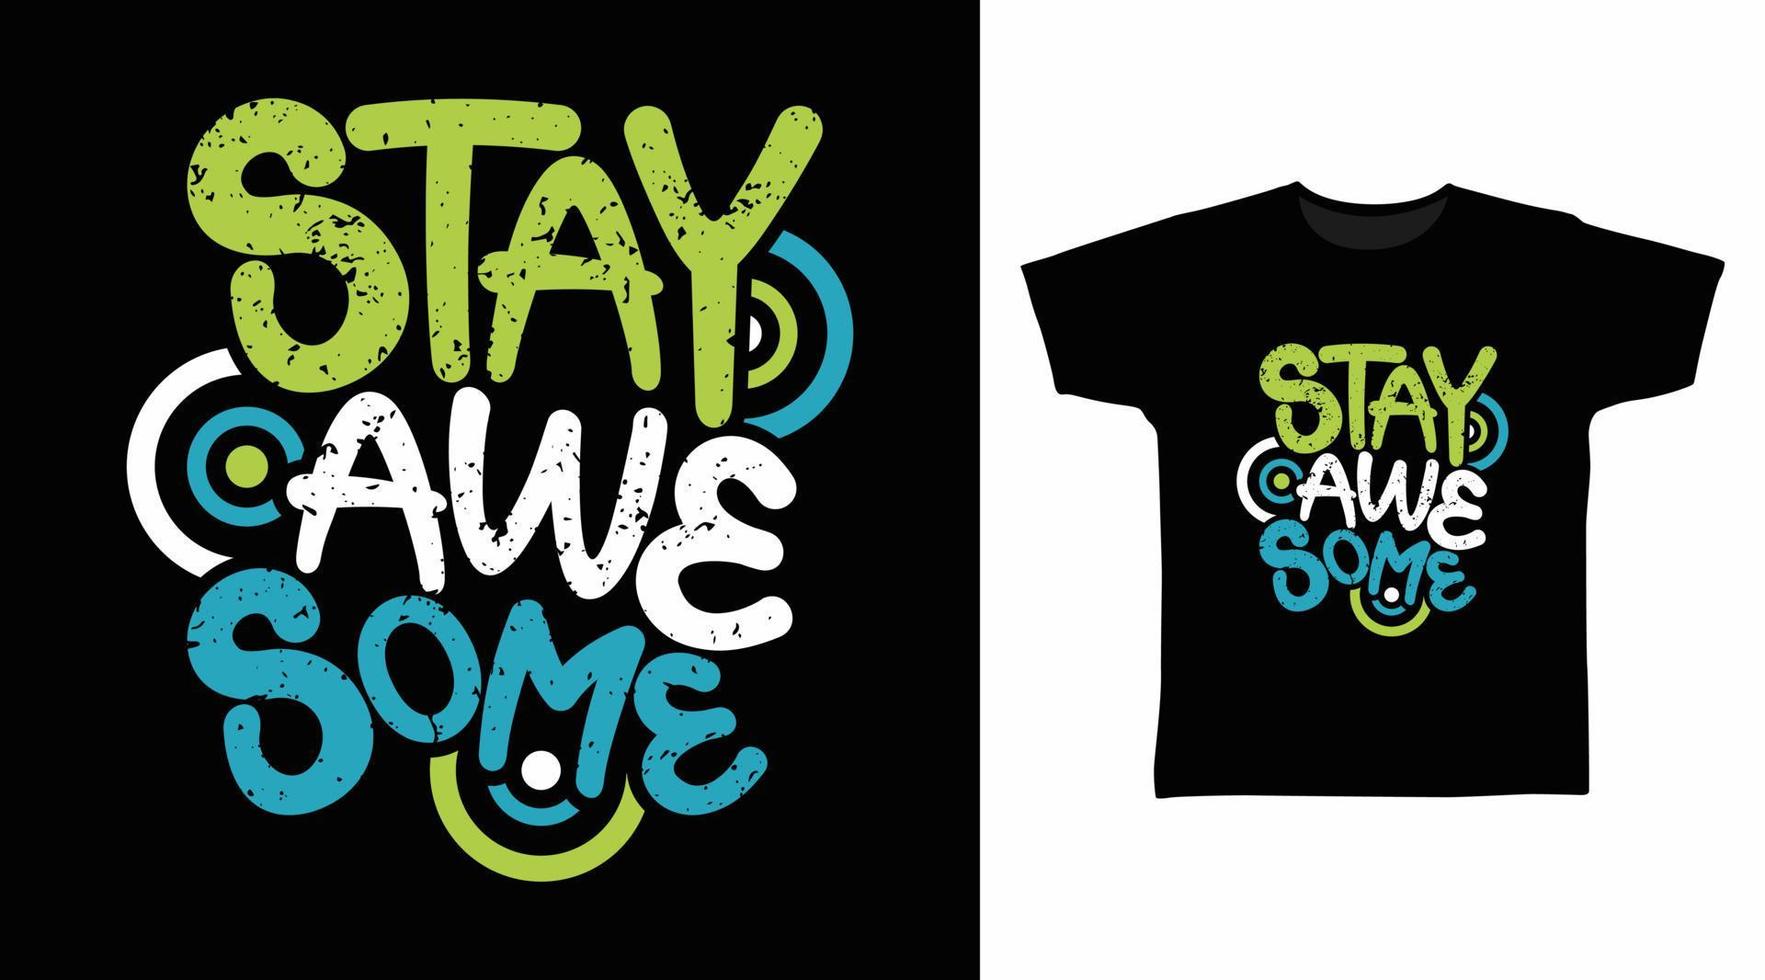 Stay awesome typography design vector illustration ready for print on tee, poster and other uses.